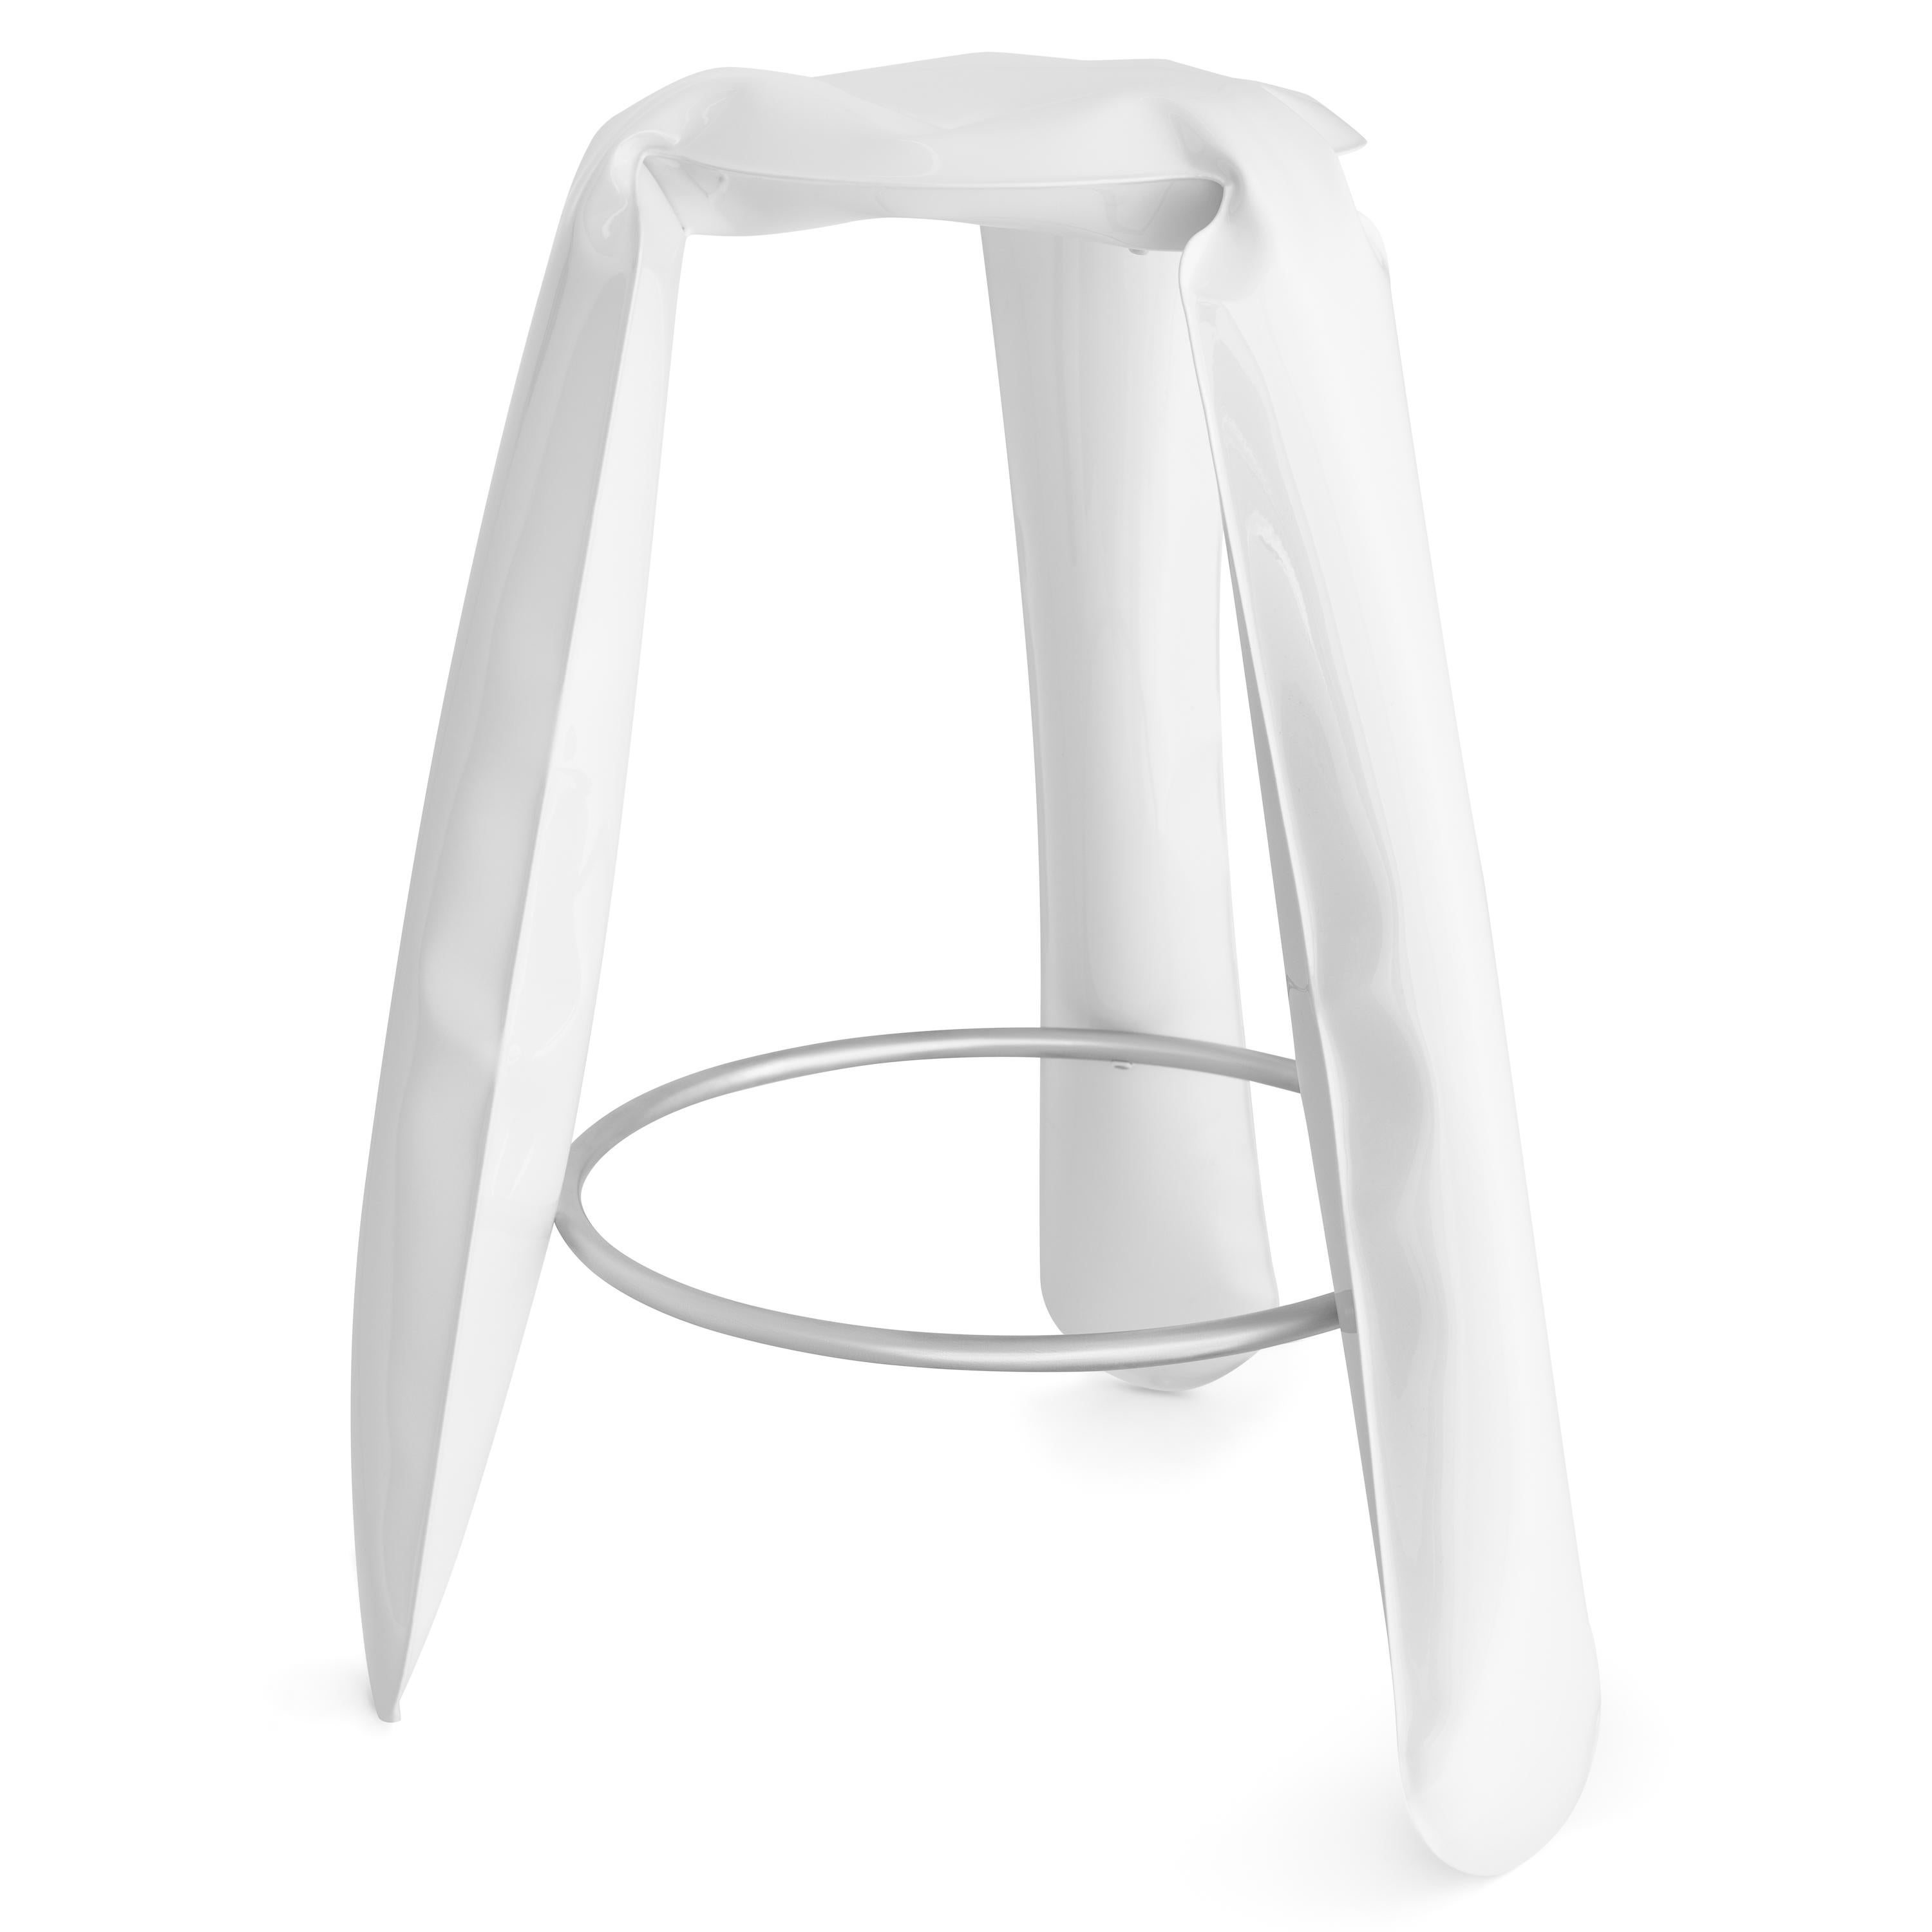 White glossy steel bar plopp stool by Zieta
Dimensions: D 35 x H 75 cm 
Material: Carbon steel. 
Finish: Powder-coated. Glossy finish. 
Available in colors: Beige, black, white, blue, graphite, moss, umbra gray, flaming gold, and cosmic blue.